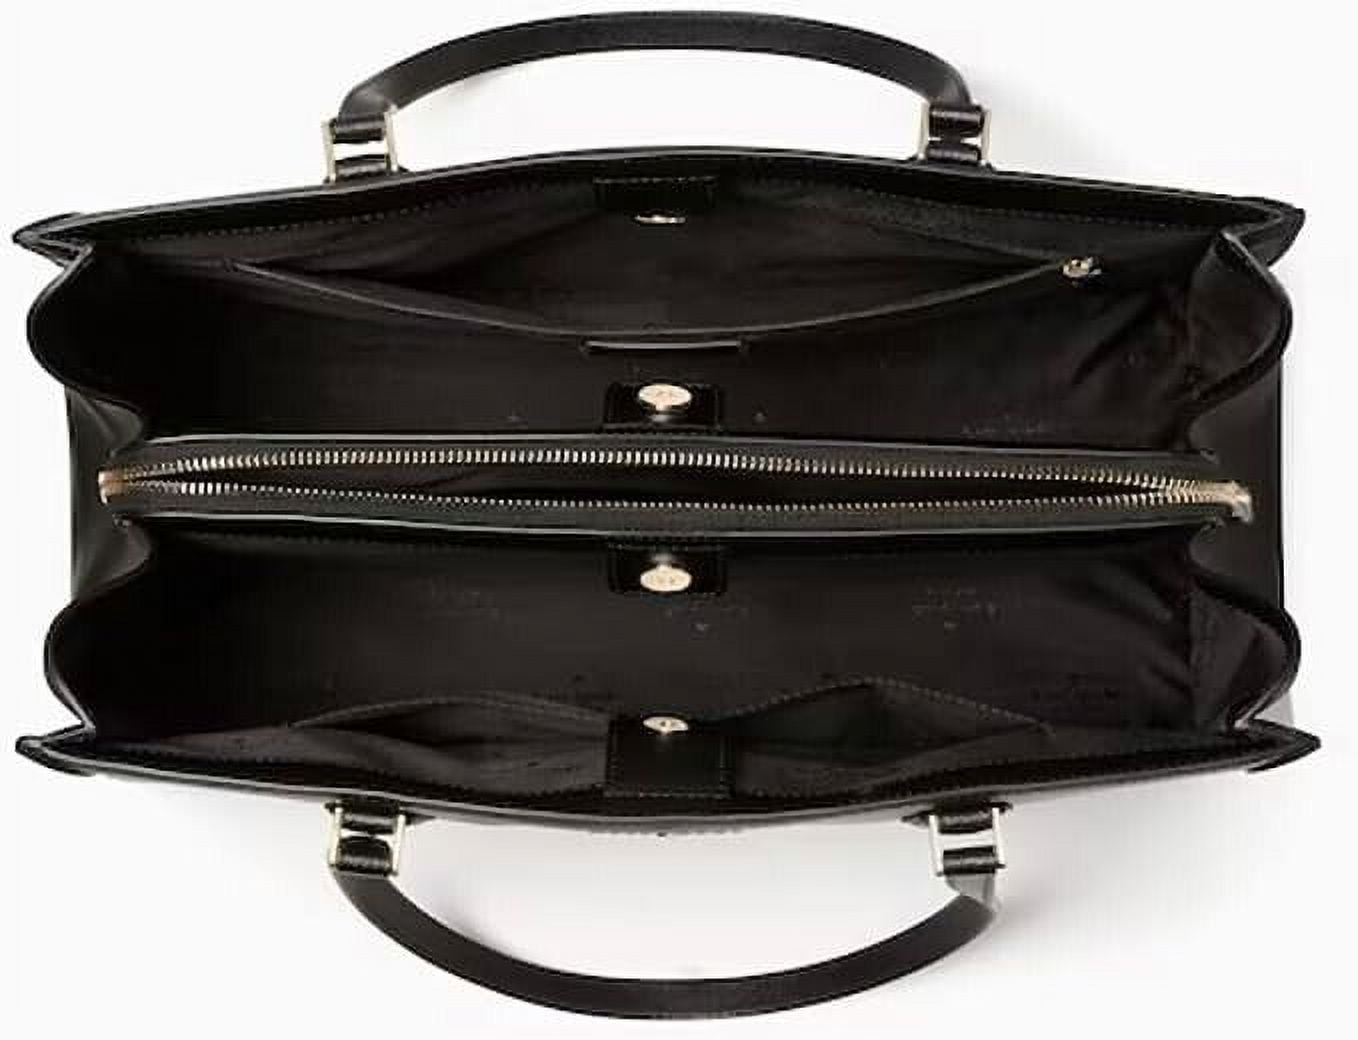 Kate Spade Madison Saffiano East West Leather Laptop Tote Black